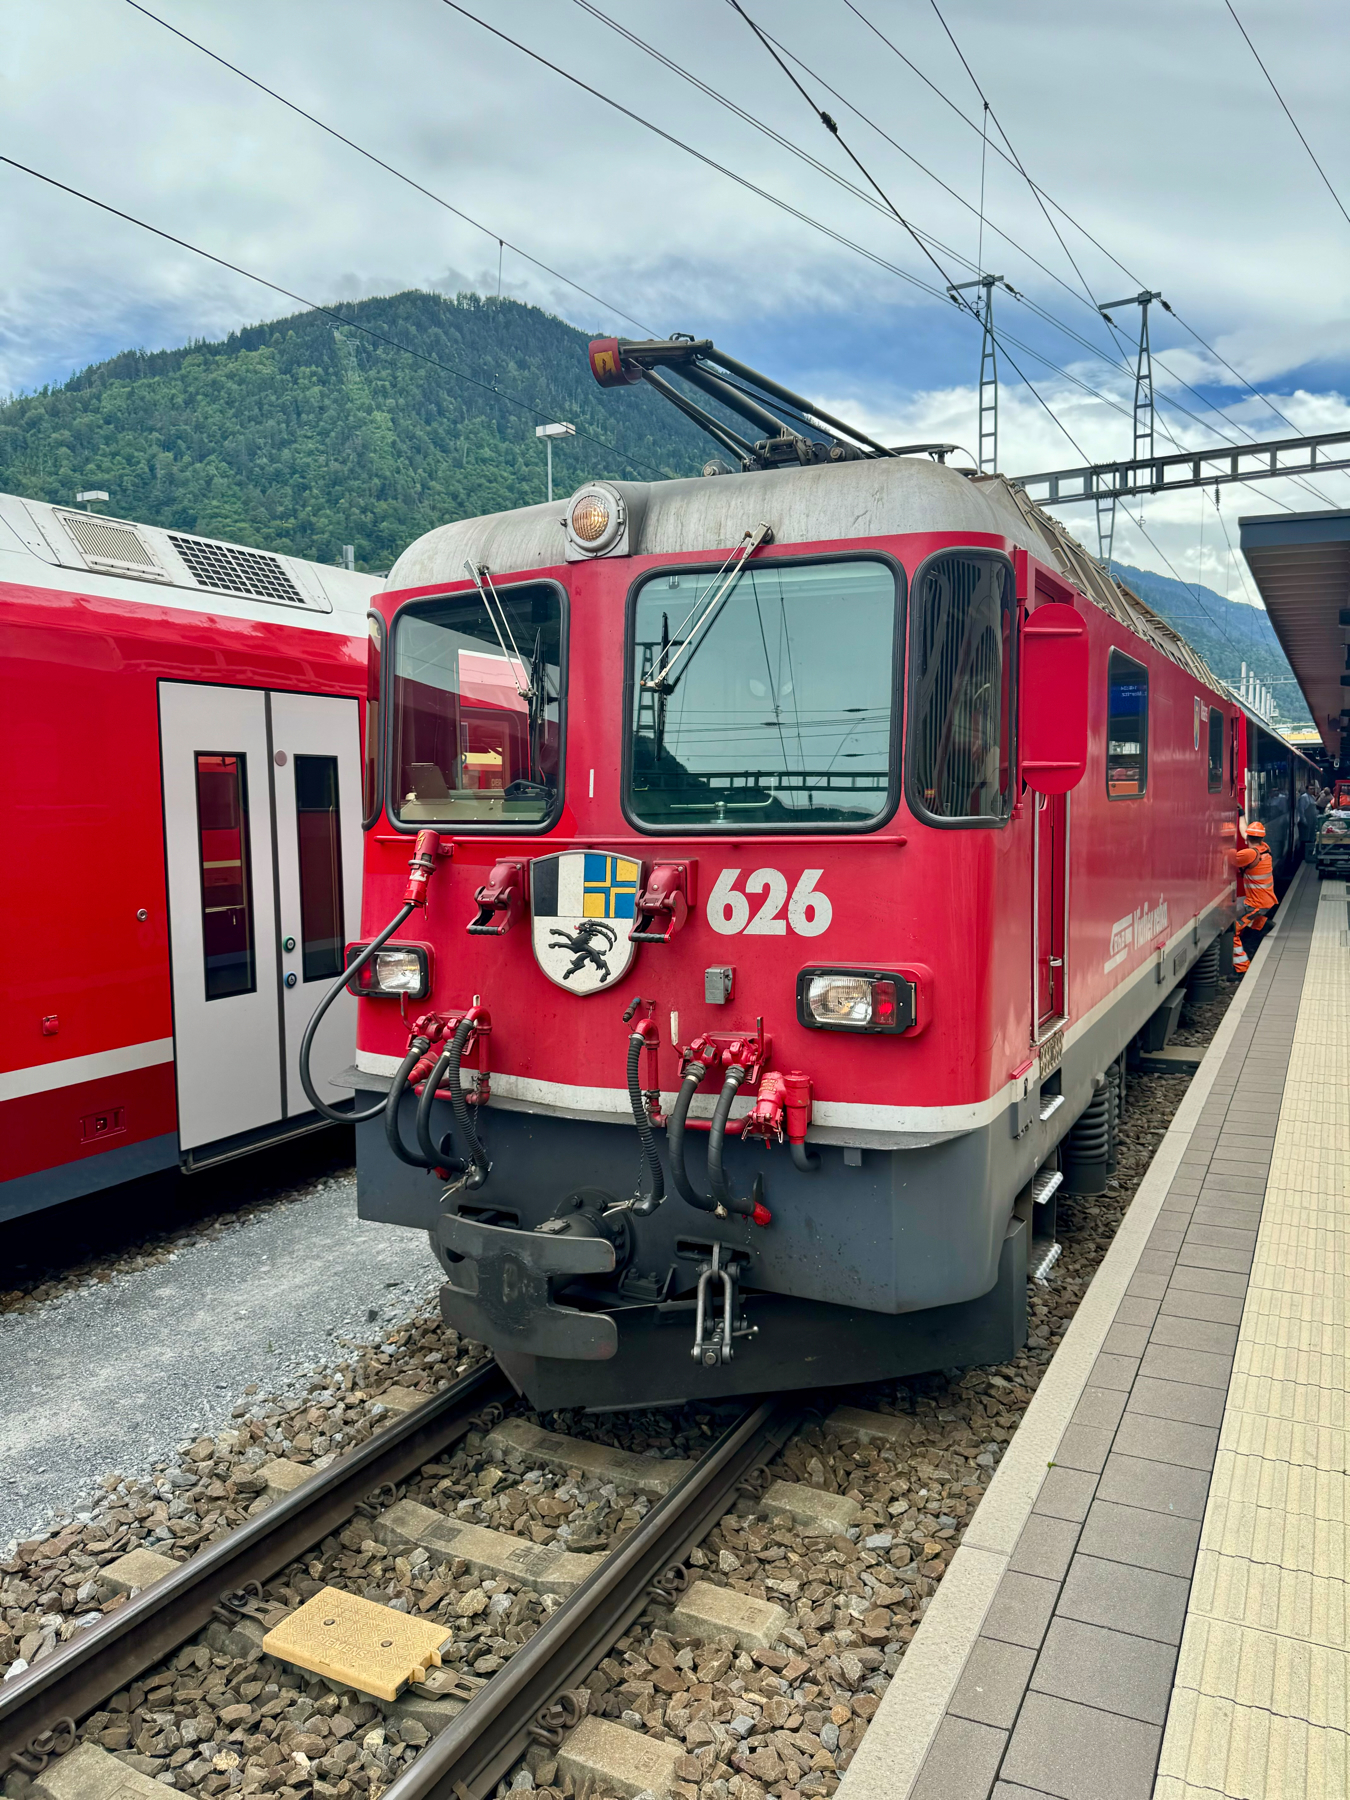 A red train locomotive with the number 626 parked at a train station, with mountains and a cloudy sky in the background.